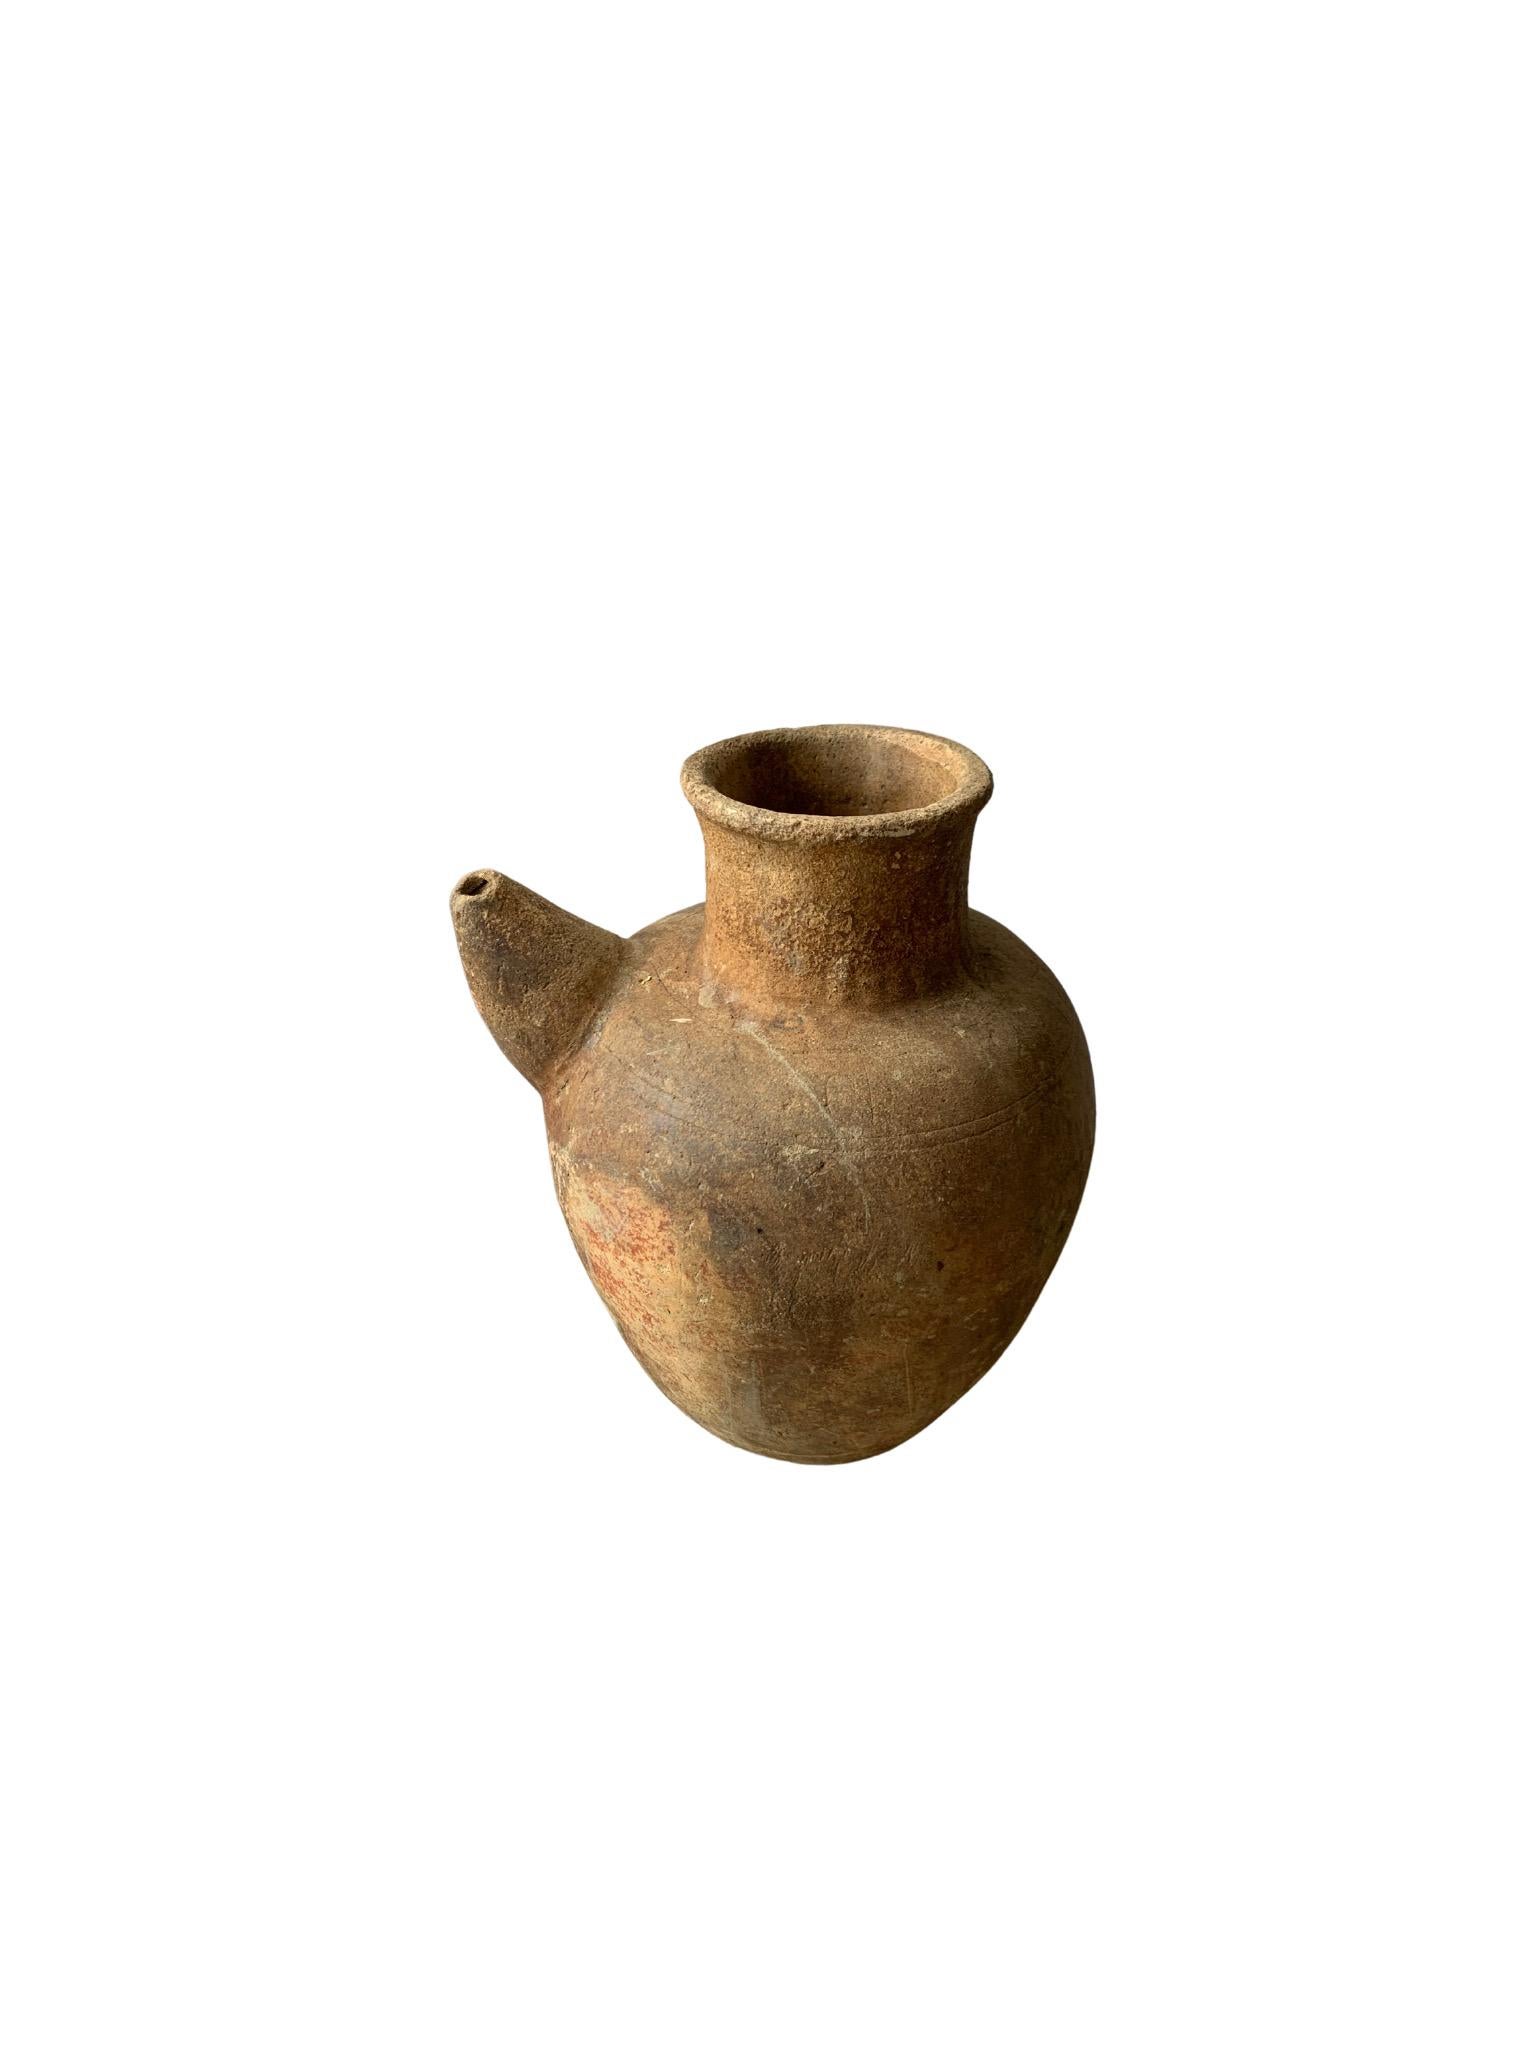 A terracotta jar from the island of Java, Indonesia with an elongated spout. Jugs such as these would have been used to store, water, oil and other liquids. The age related markings and fading to the jar add to its appeal. A versatile object to